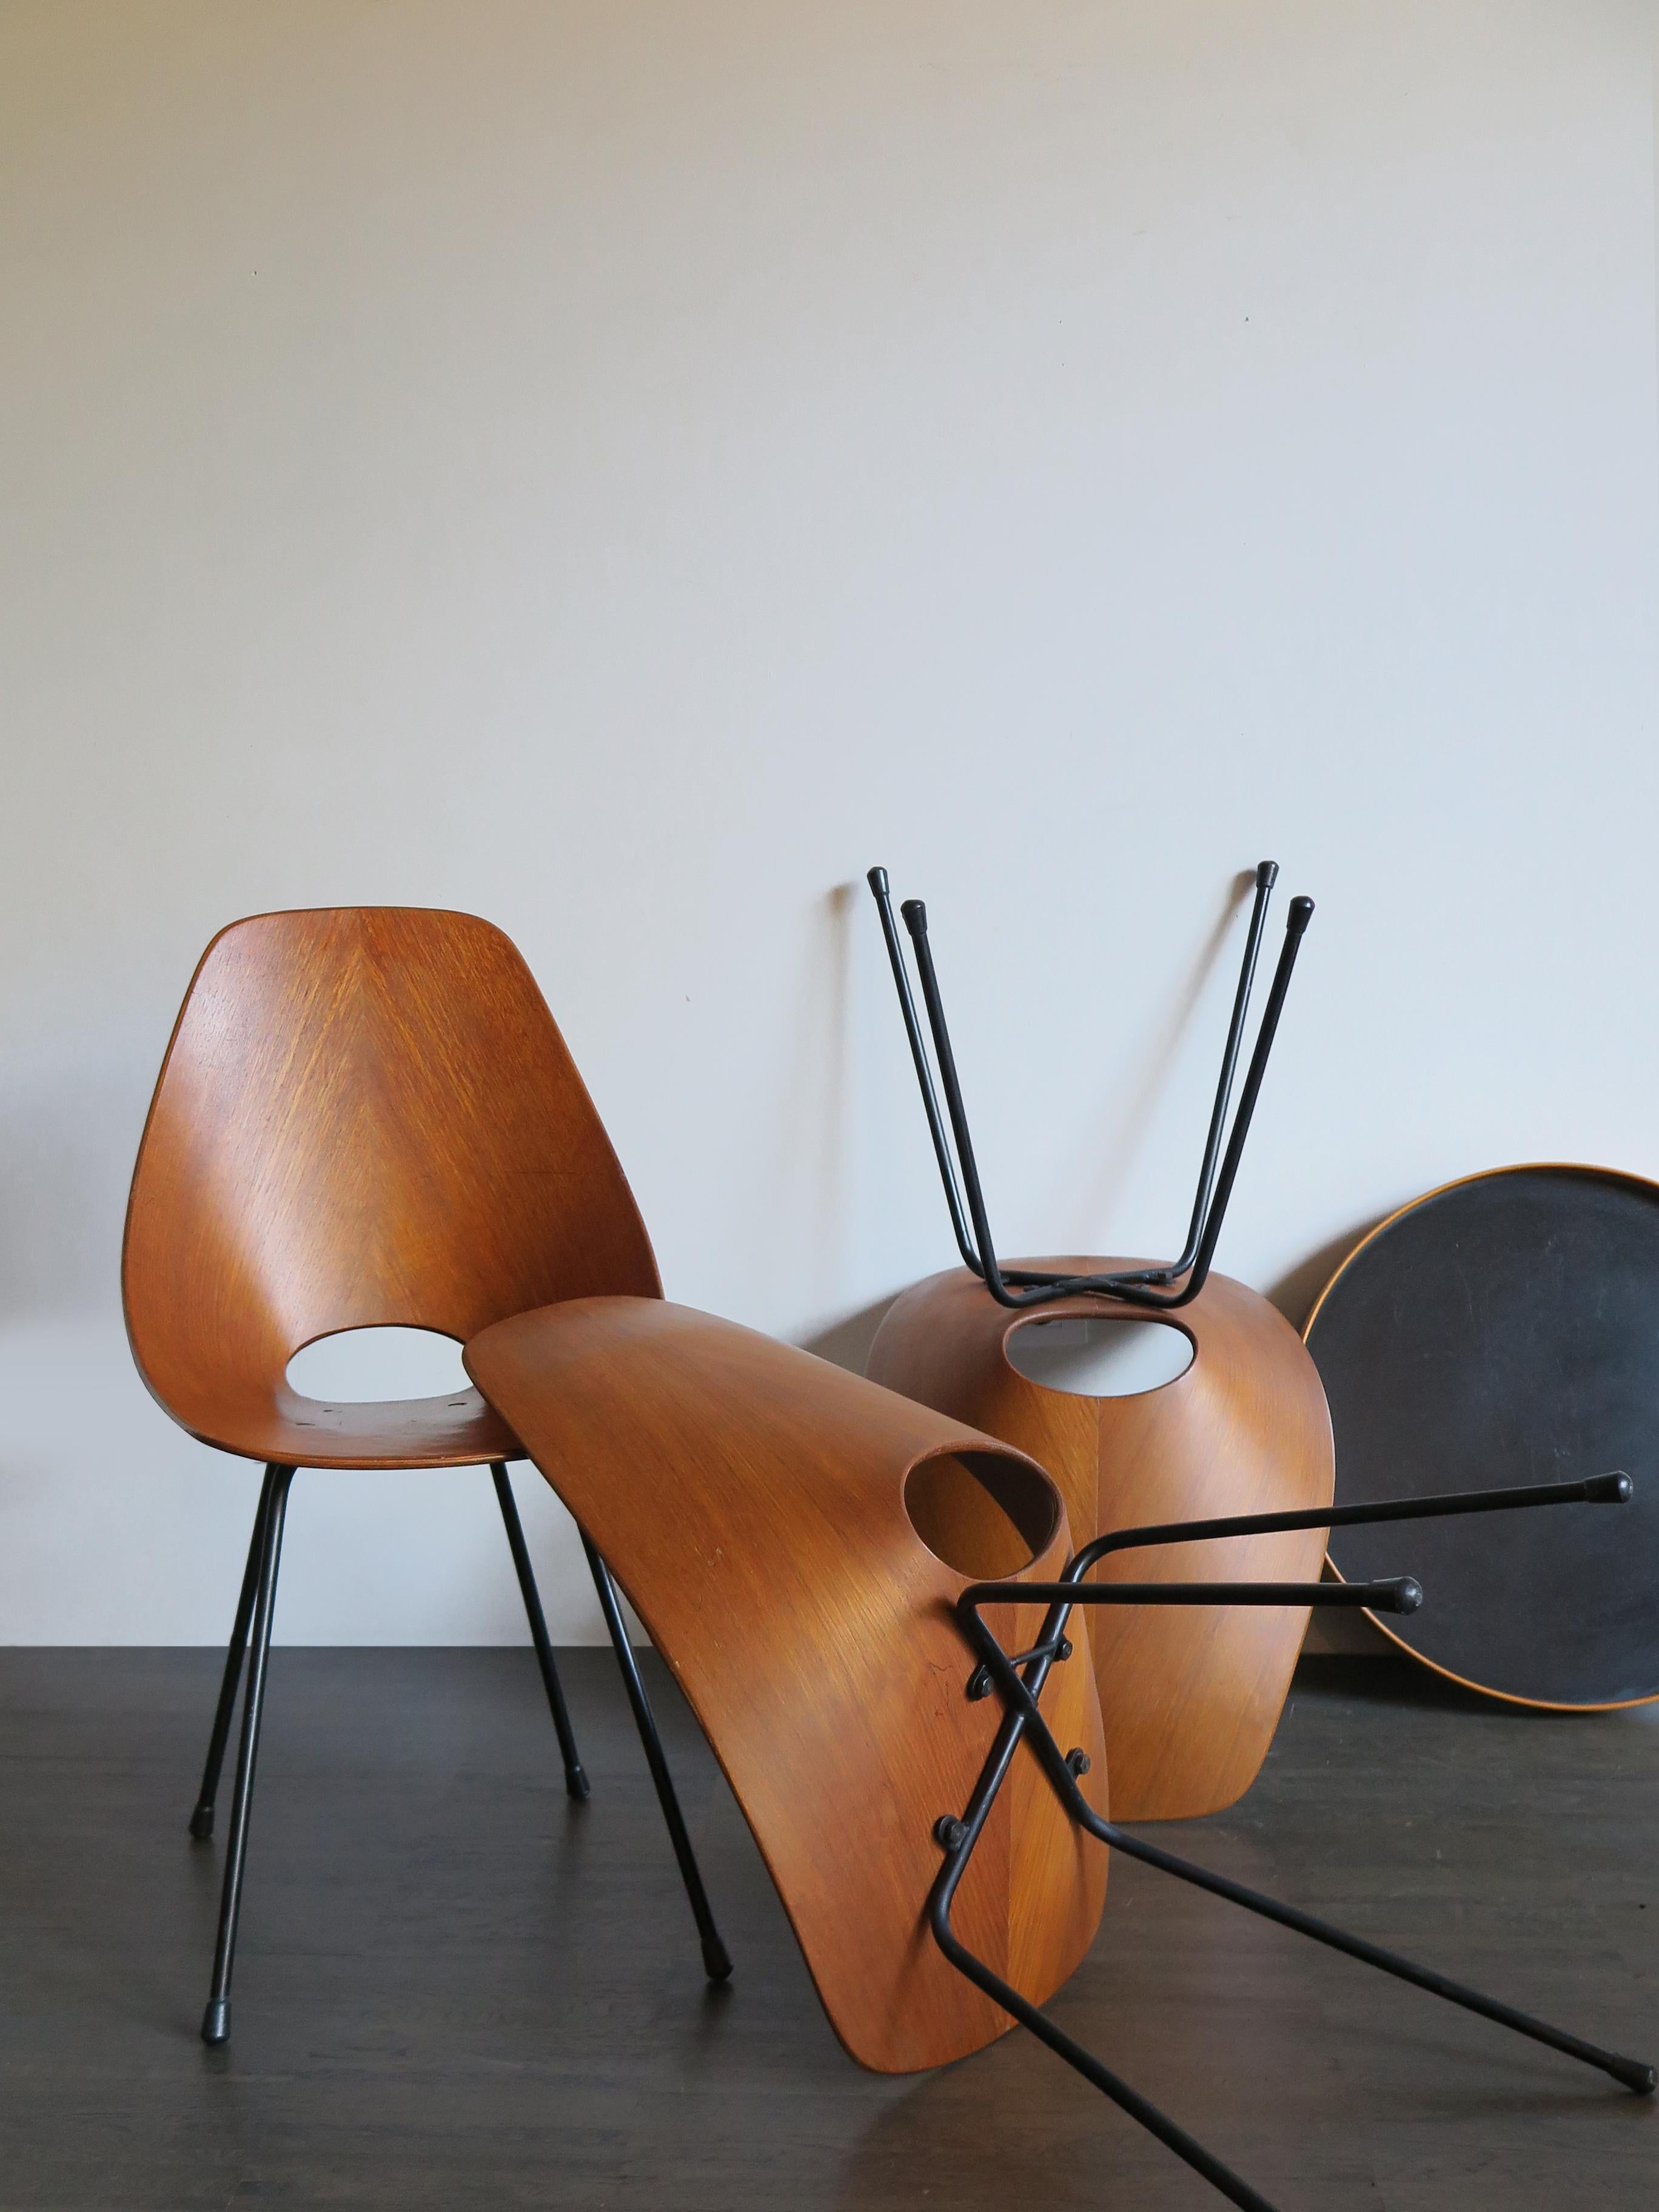 Painted Vittorio Nobili Italian Wood Medea Chairs for Fratelli Tagliabue, 1950s For Sale